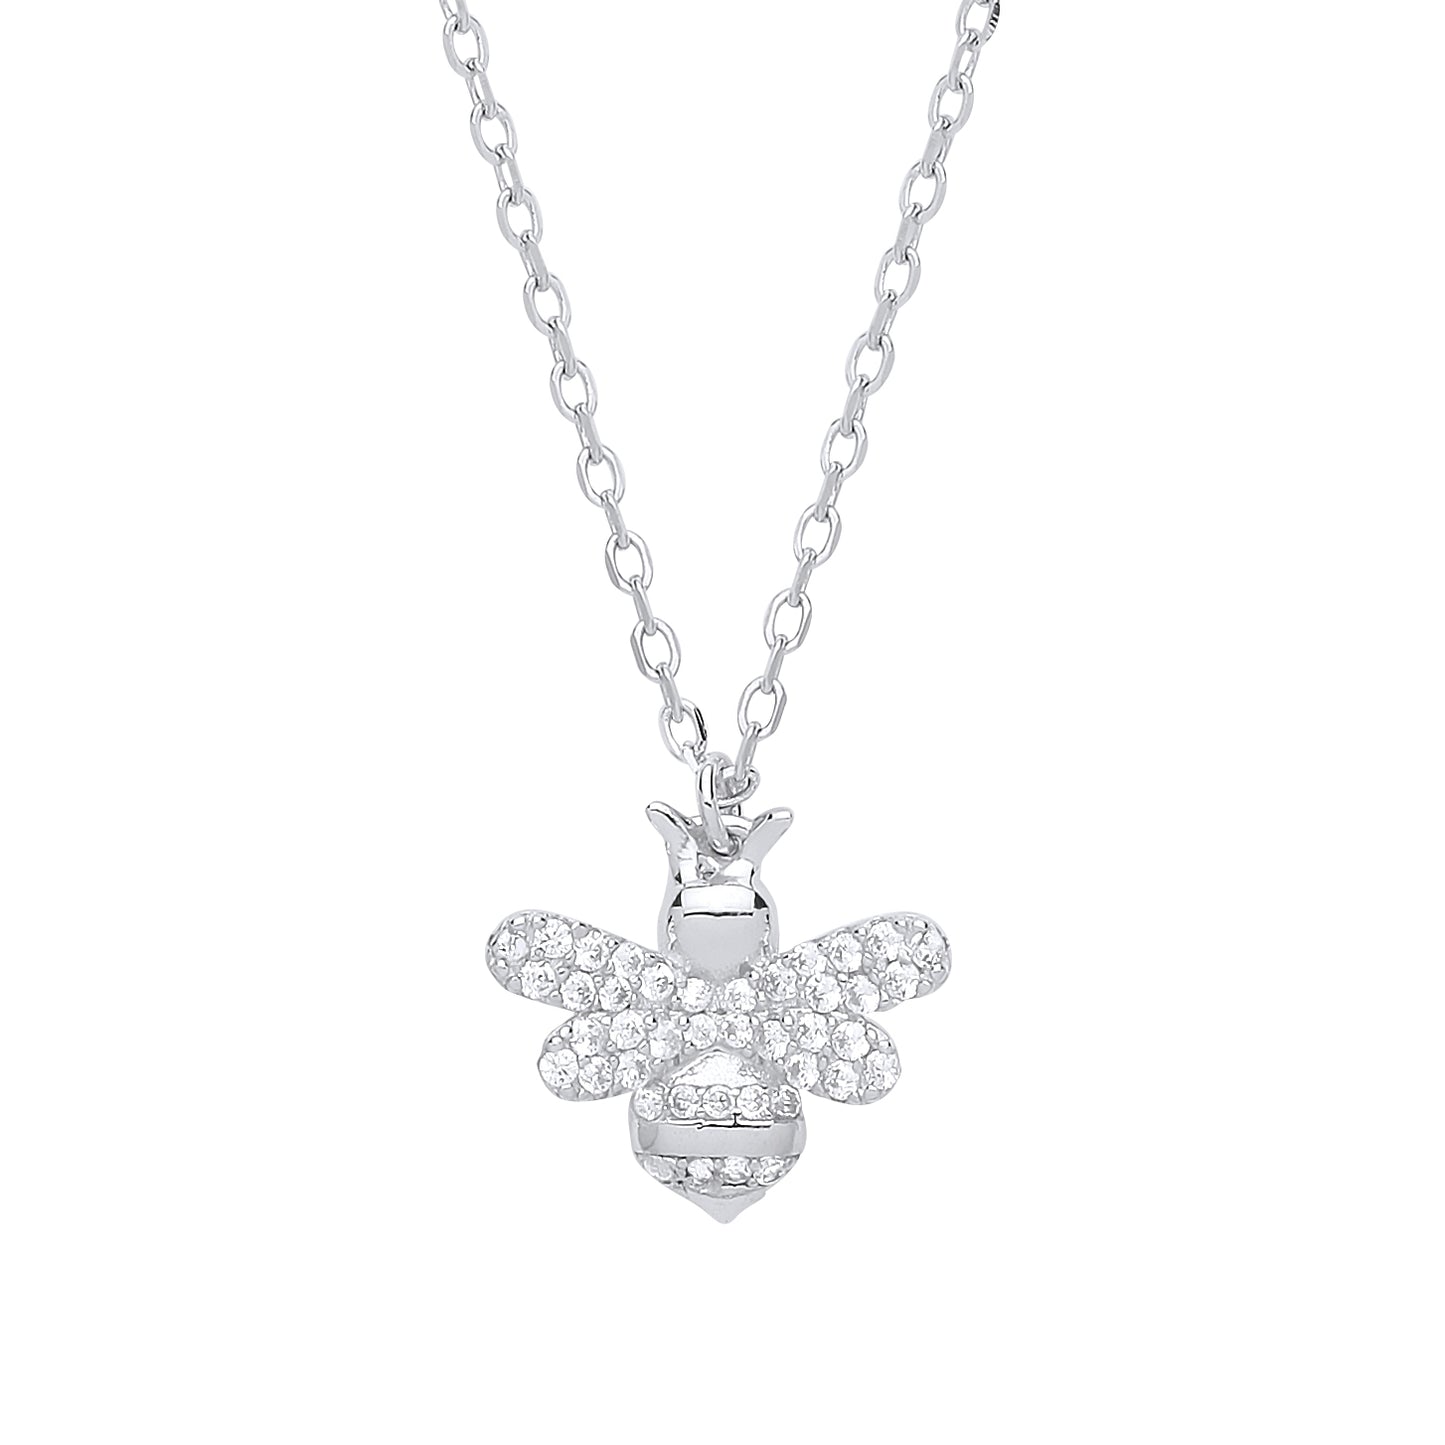 Silver  CZ Honey Queen Bee Charm Necklace 16 inch - GVK273